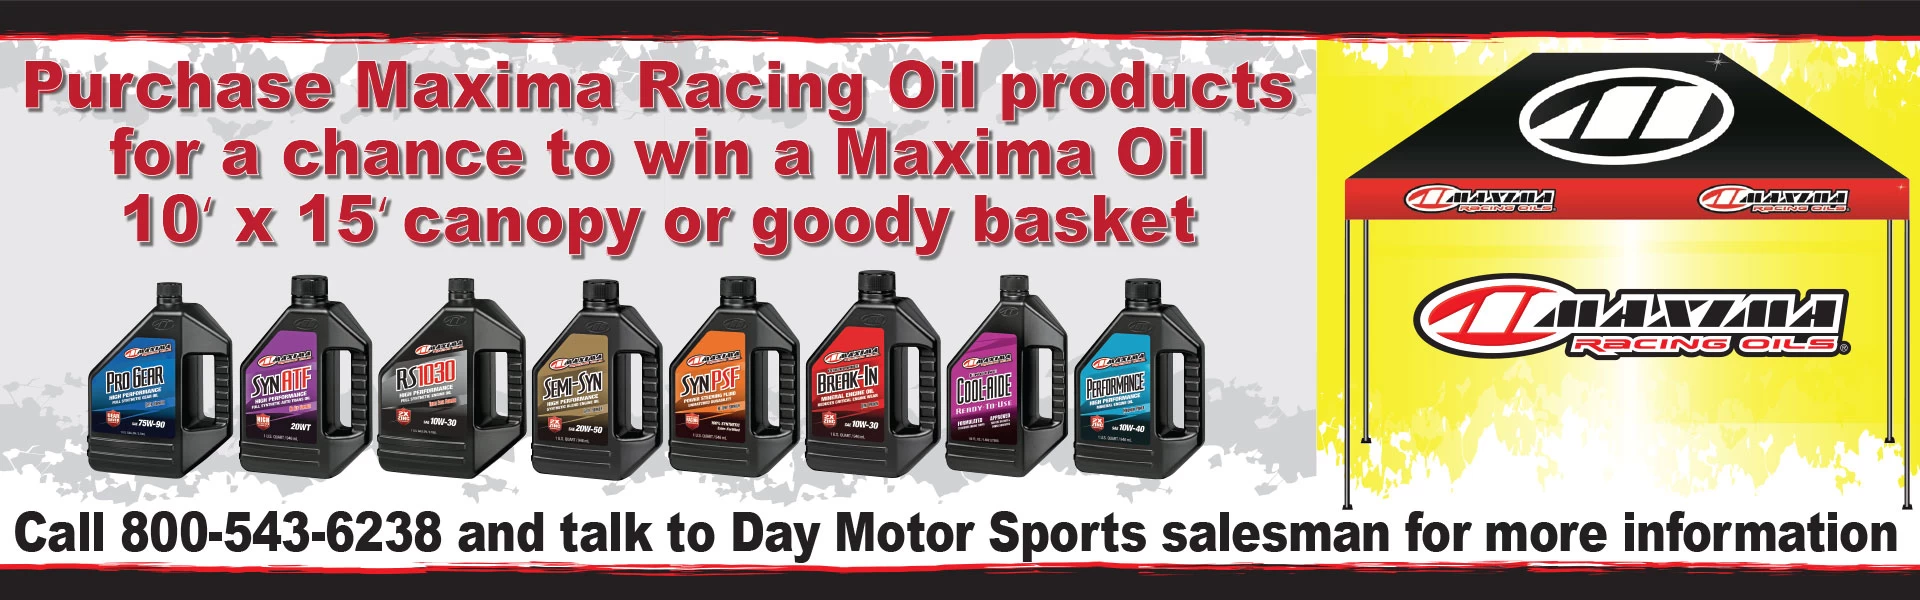 Maxima Racing Oil canopy giveaway at Day Motor Sports.